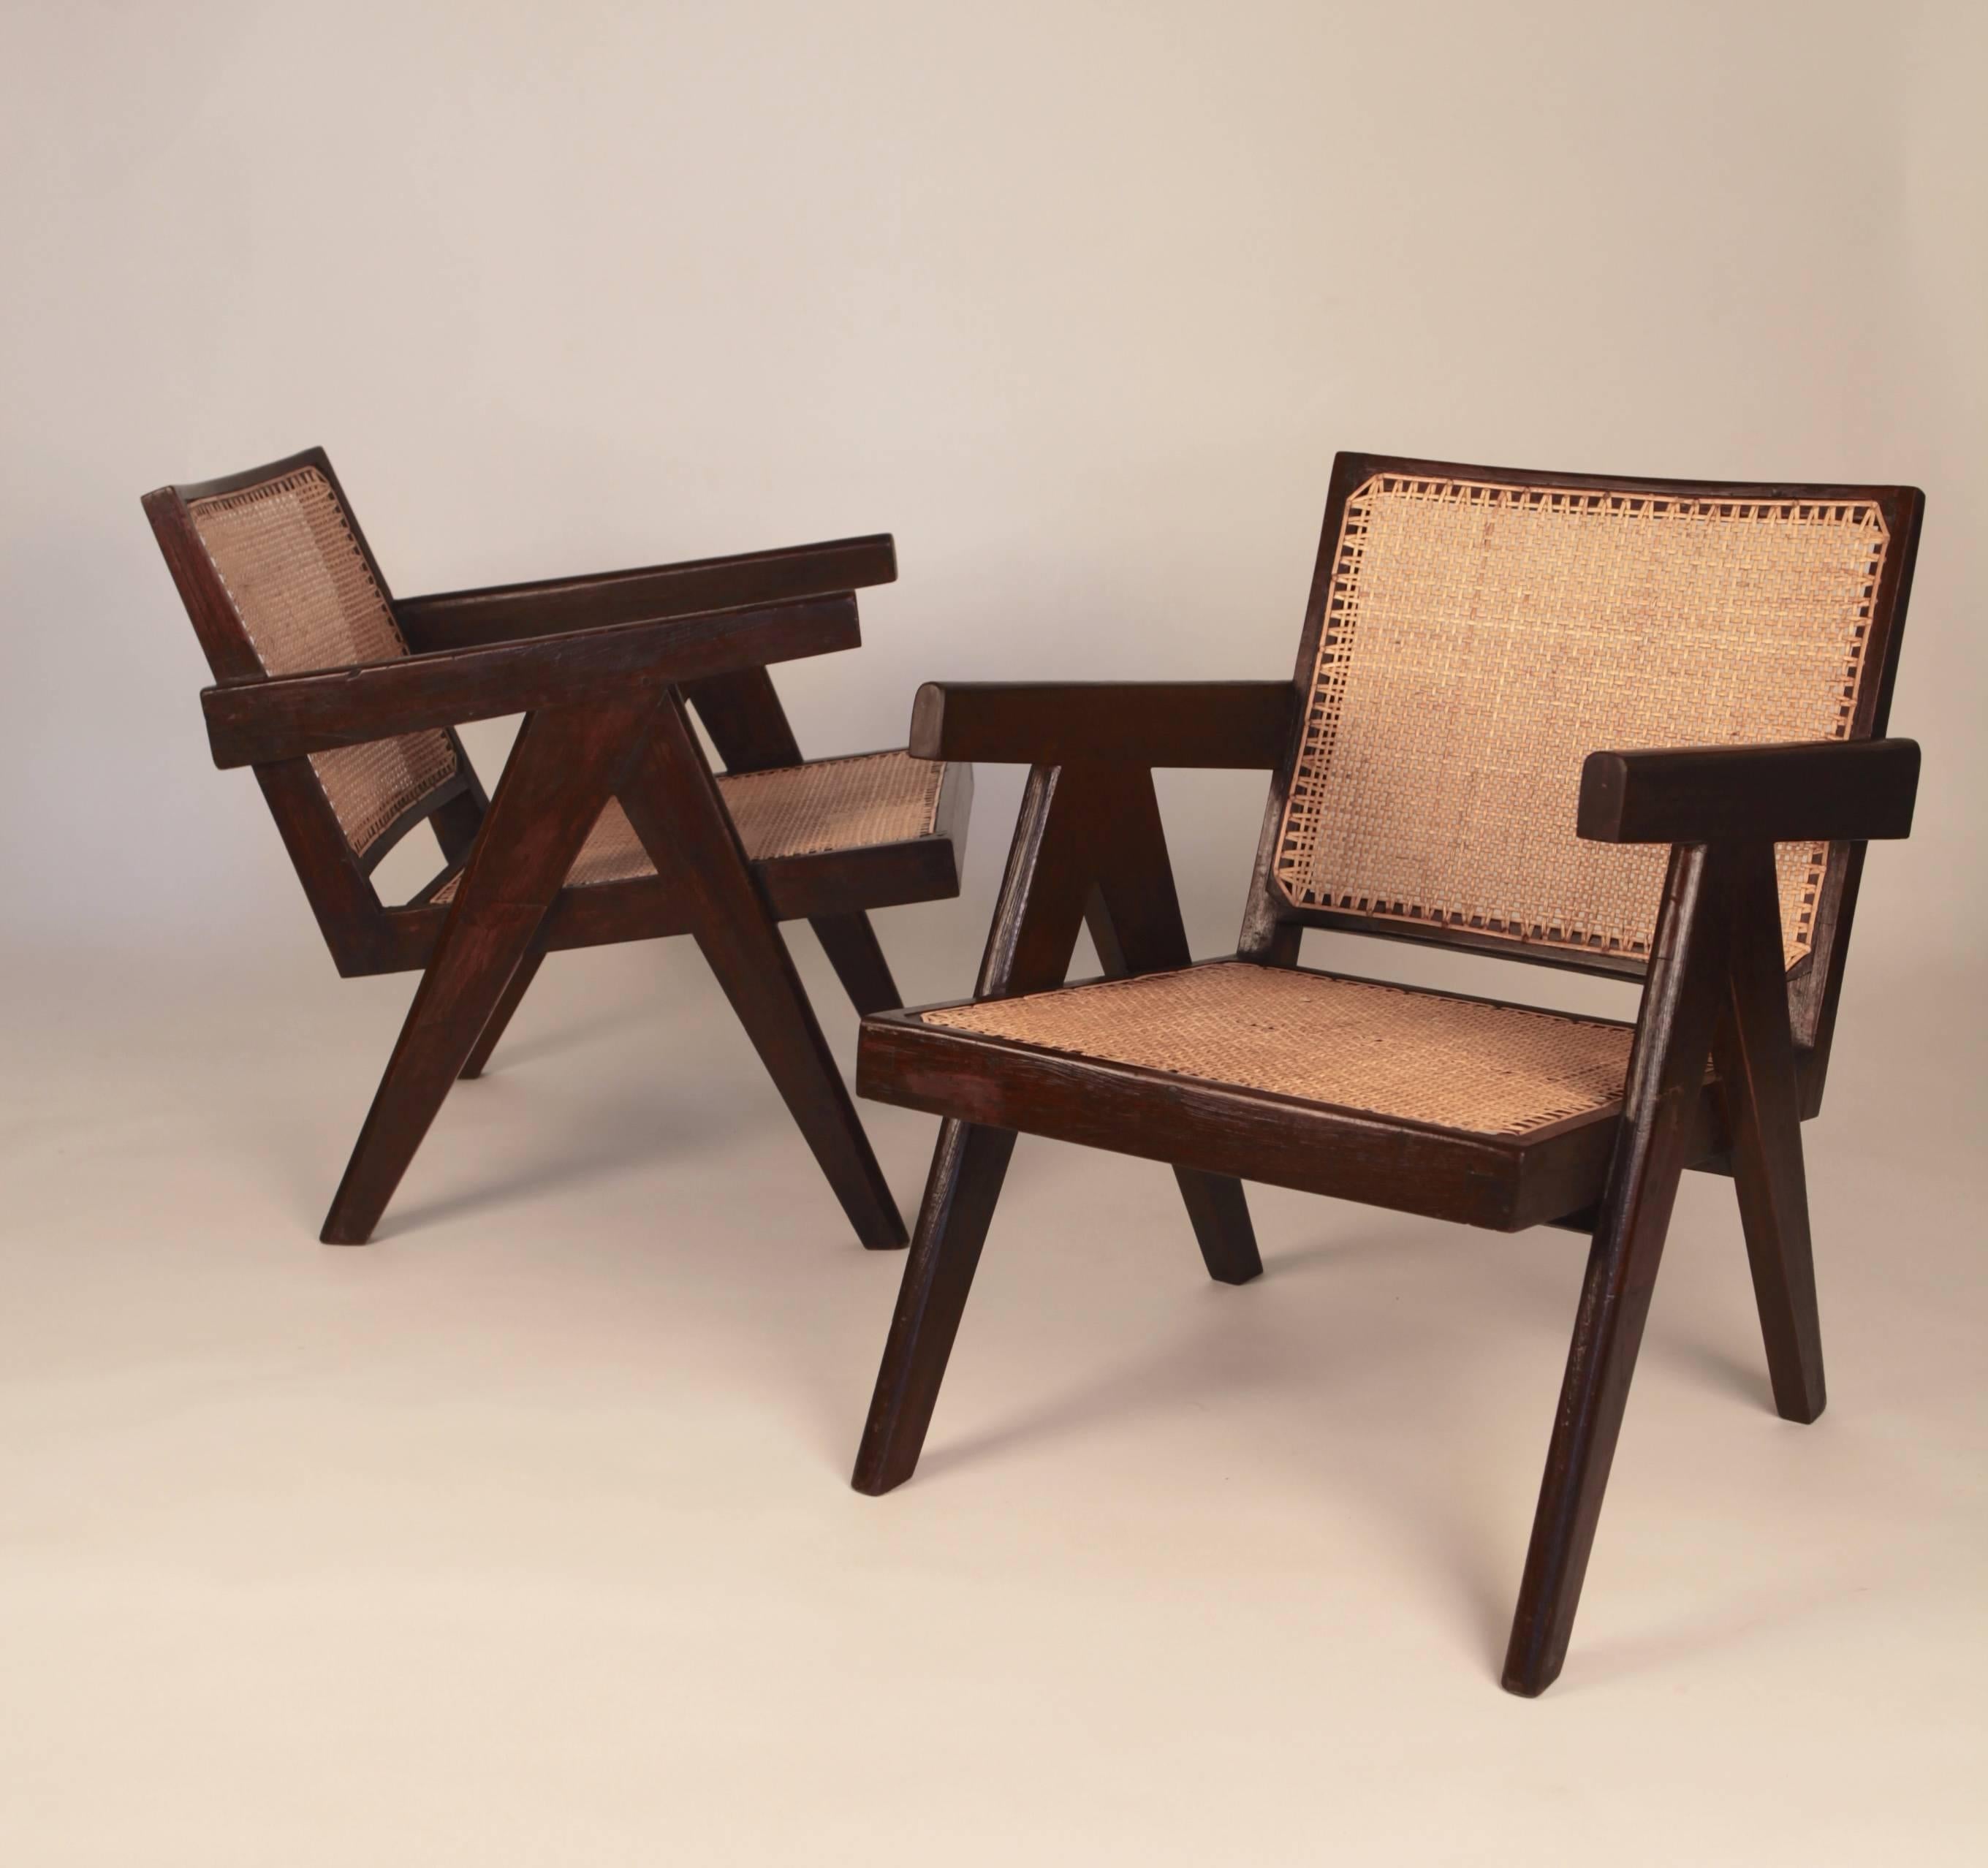 Pierre Jeanneret.

Pair of easy armchairs,

stained teak and cane.

Provenance: Chandigarh, India, 1955.

Literature: Le Corbusier Pierre Jeanneret, Chandigarh, India.

Galereie Patrick Seguin, pg. 176, 283.

Le Corbusier Pierre